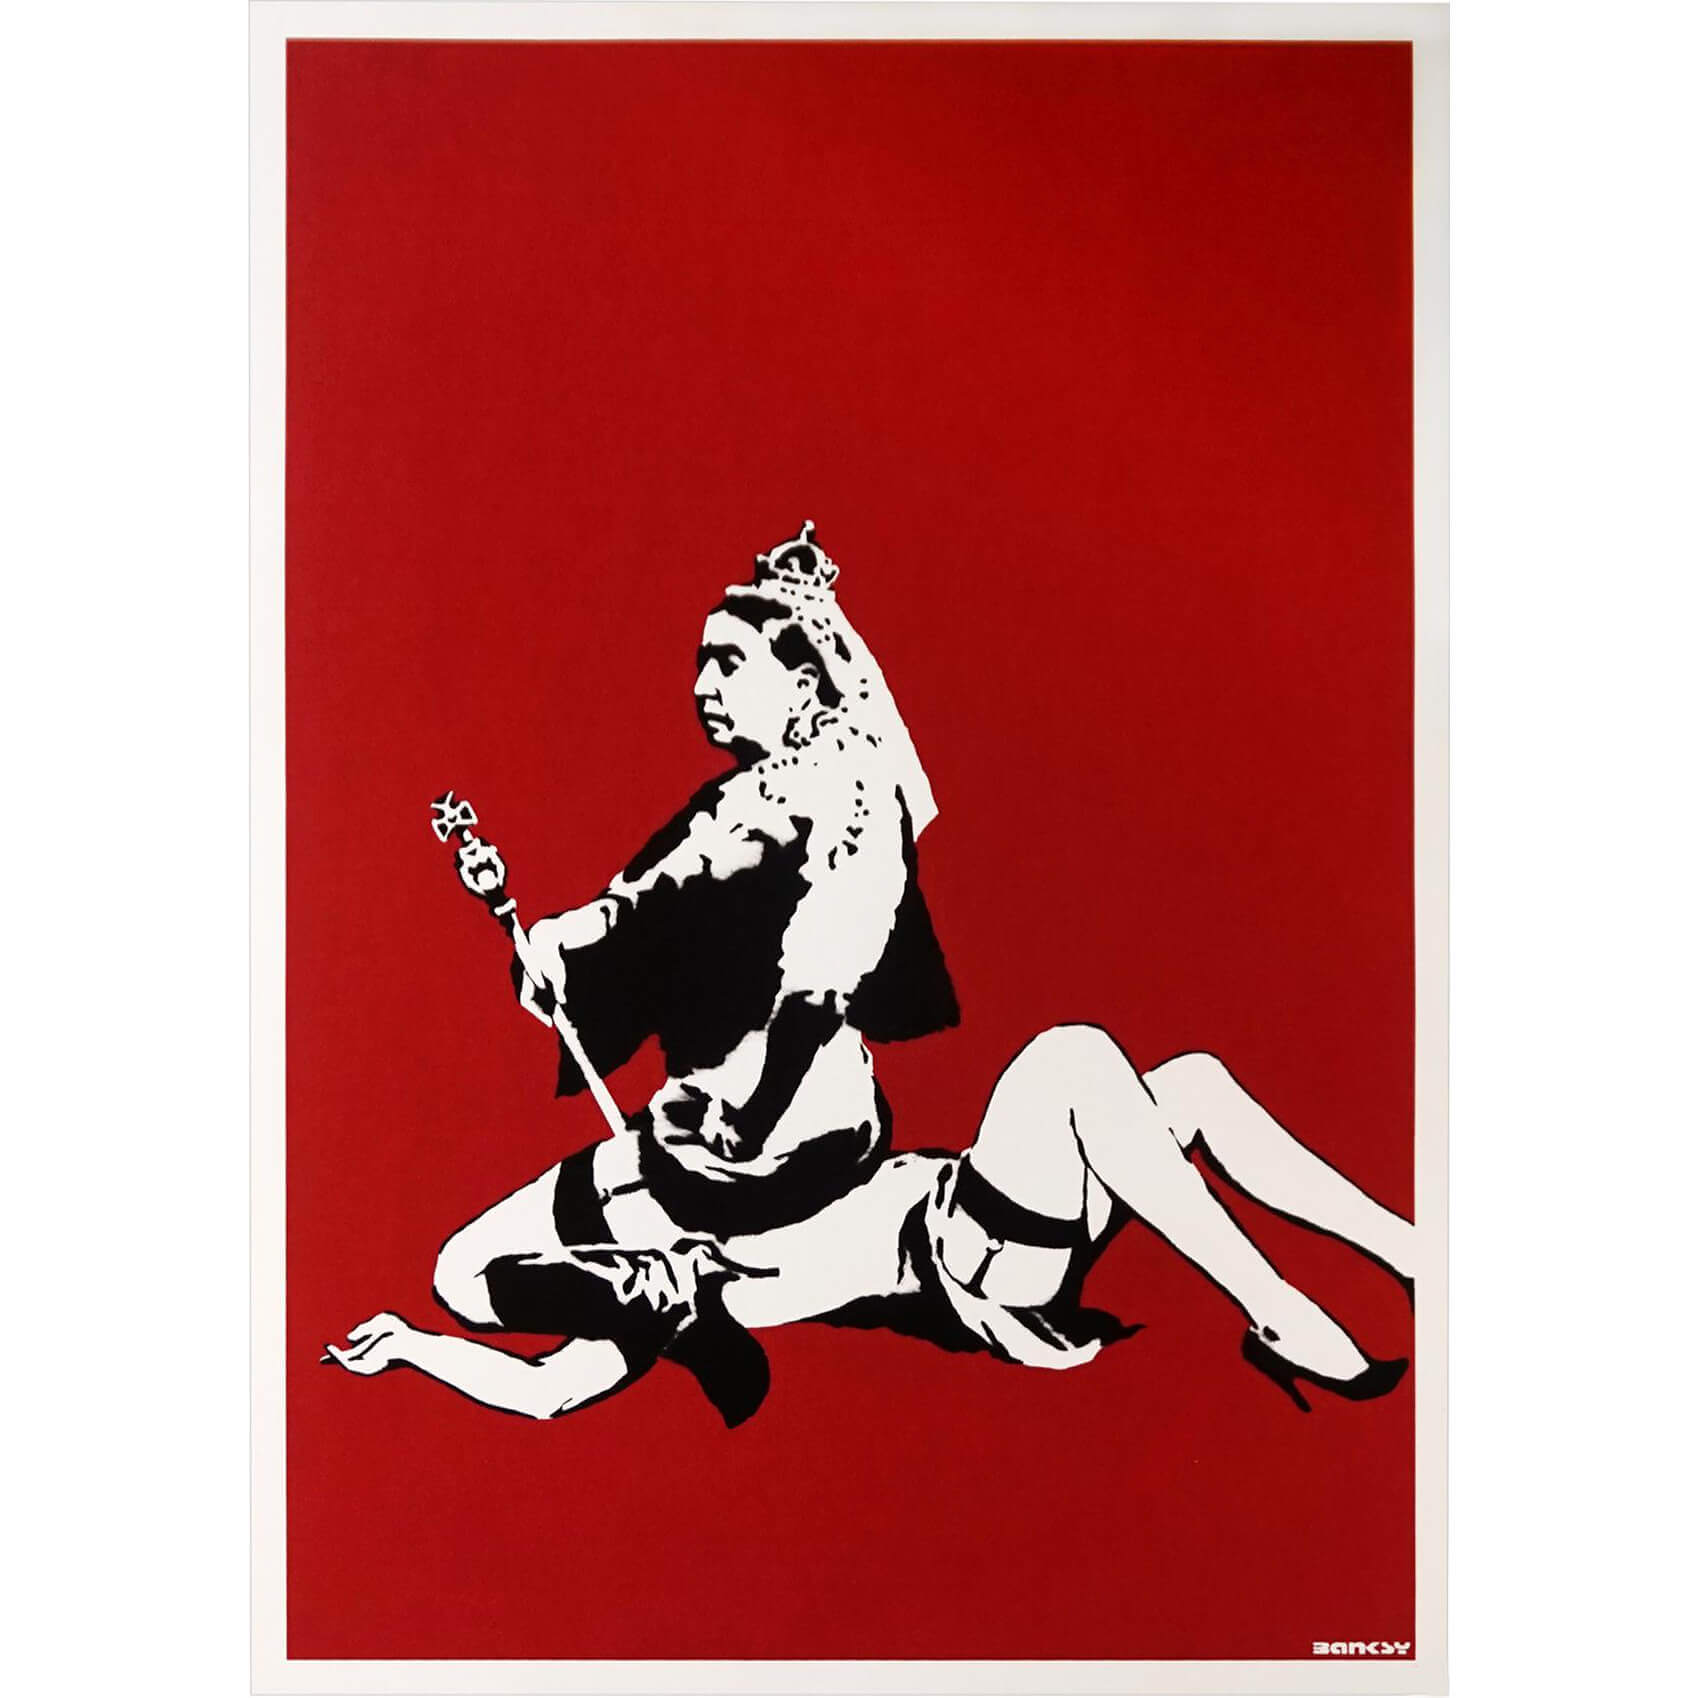 Banksy - Queen Vic (Unsigned) Print